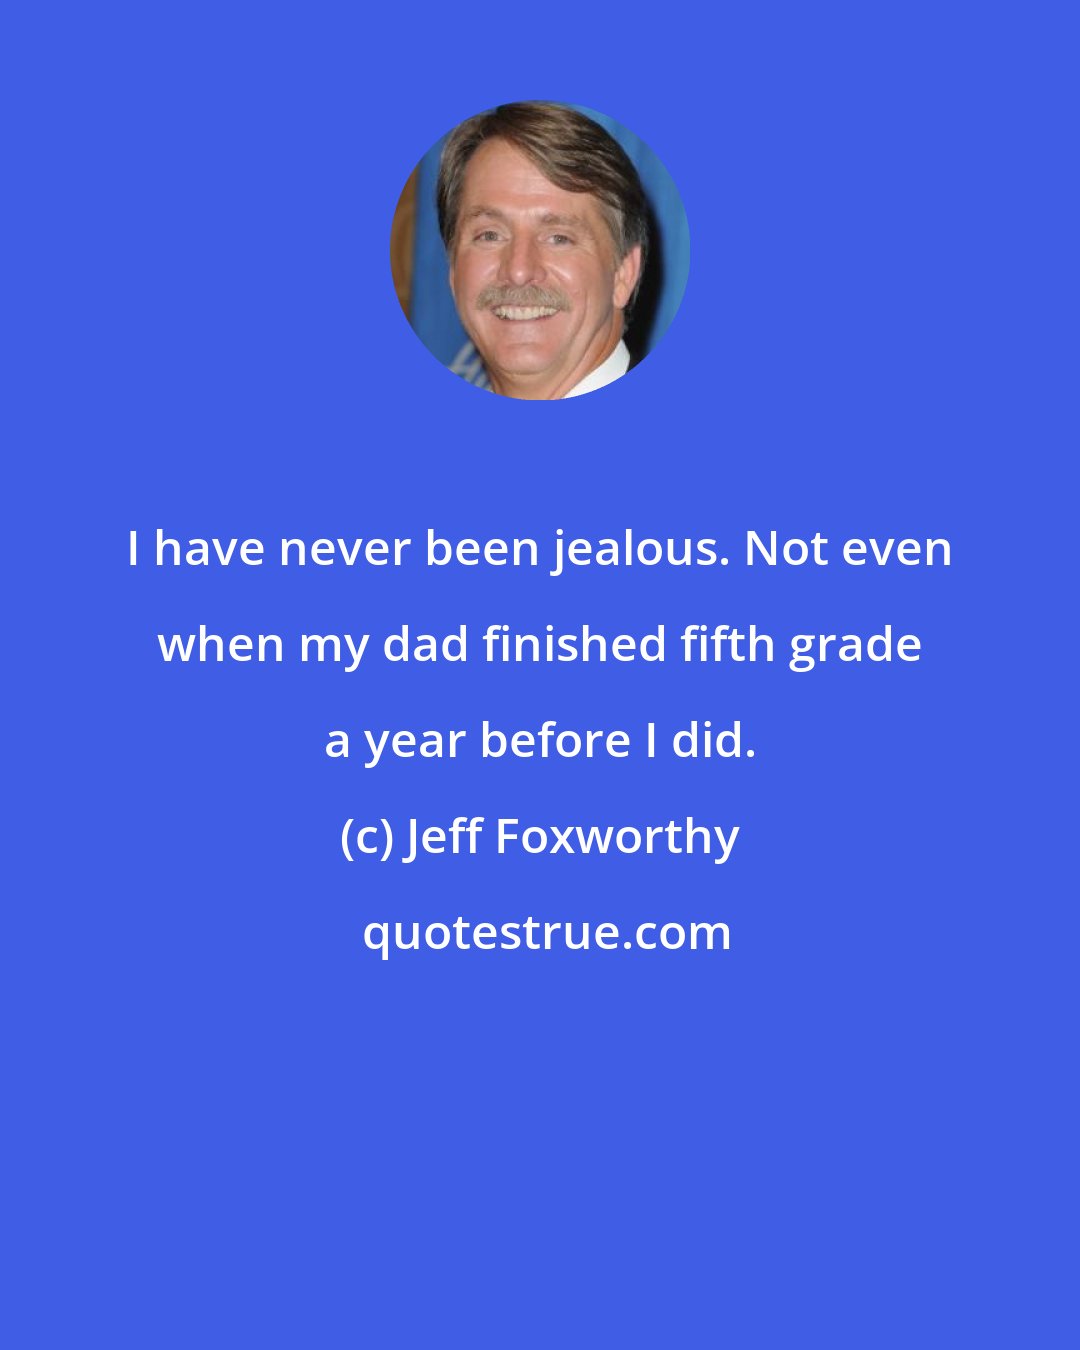 Jeff Foxworthy: I have never been jealous. Not even when my dad finished fifth grade a year before I did.